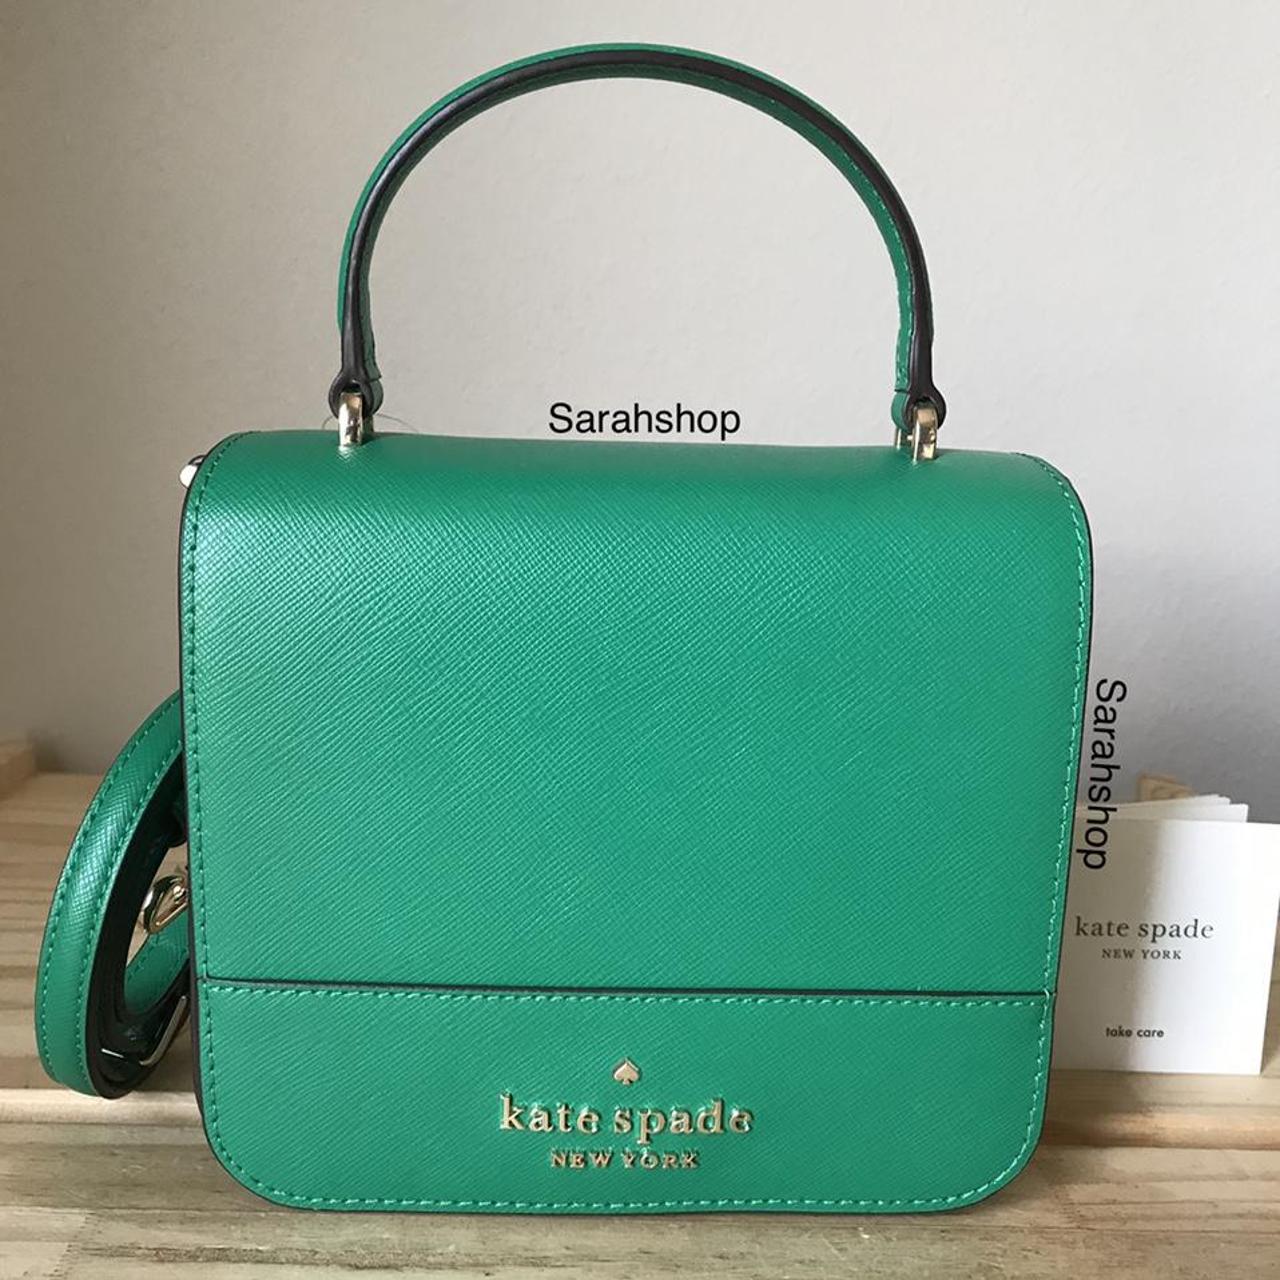 Authentic KATE SPADE Pebbled leather REVERSIBLE Open - Depop